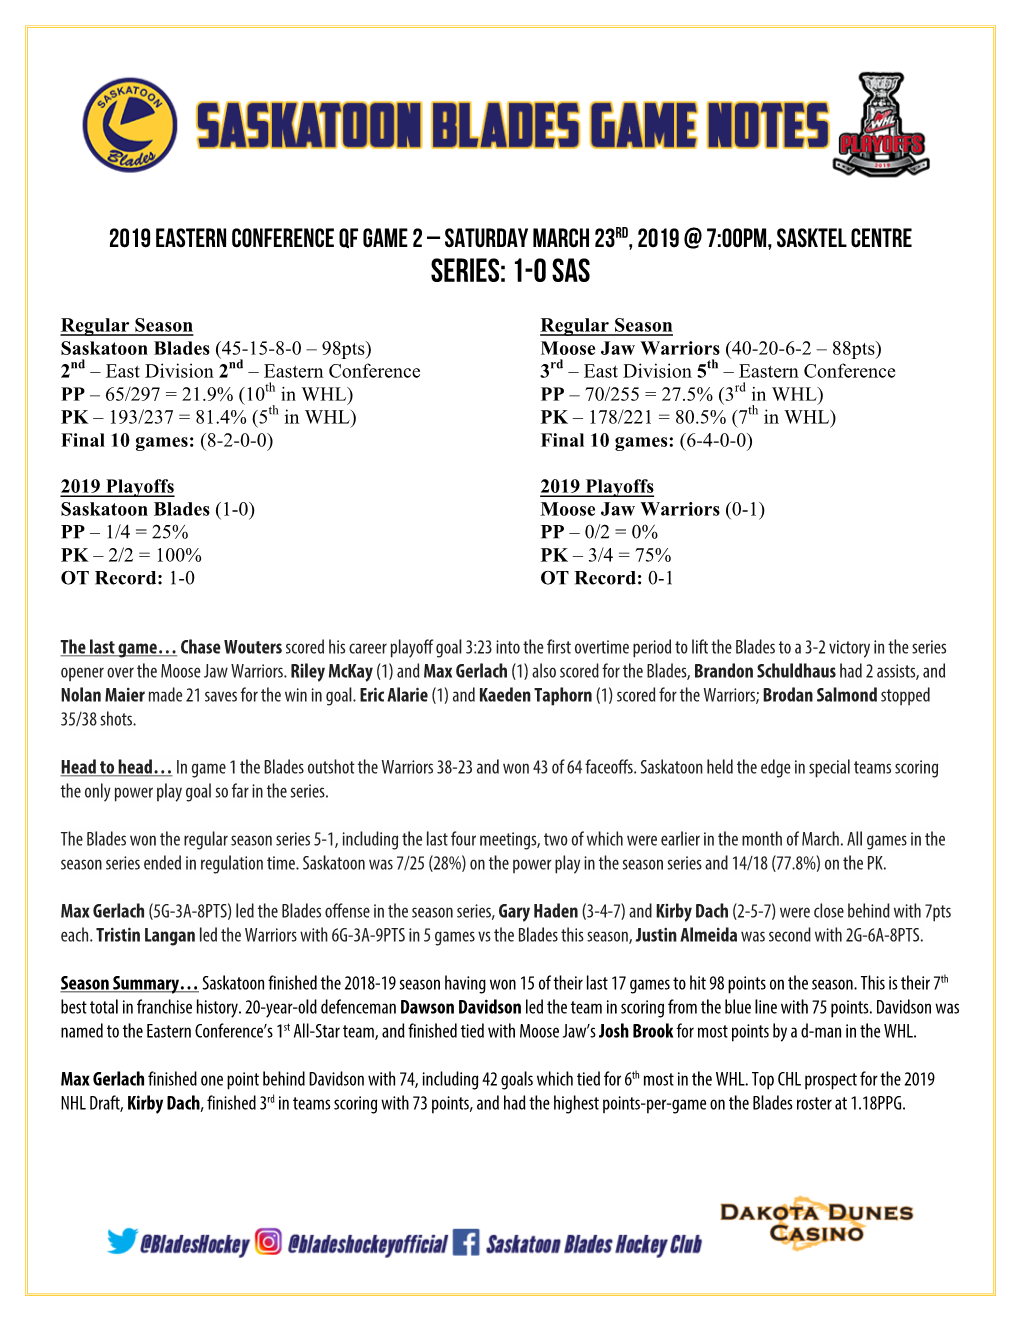 Blades Notes & Stats Game 2 Vs MJ